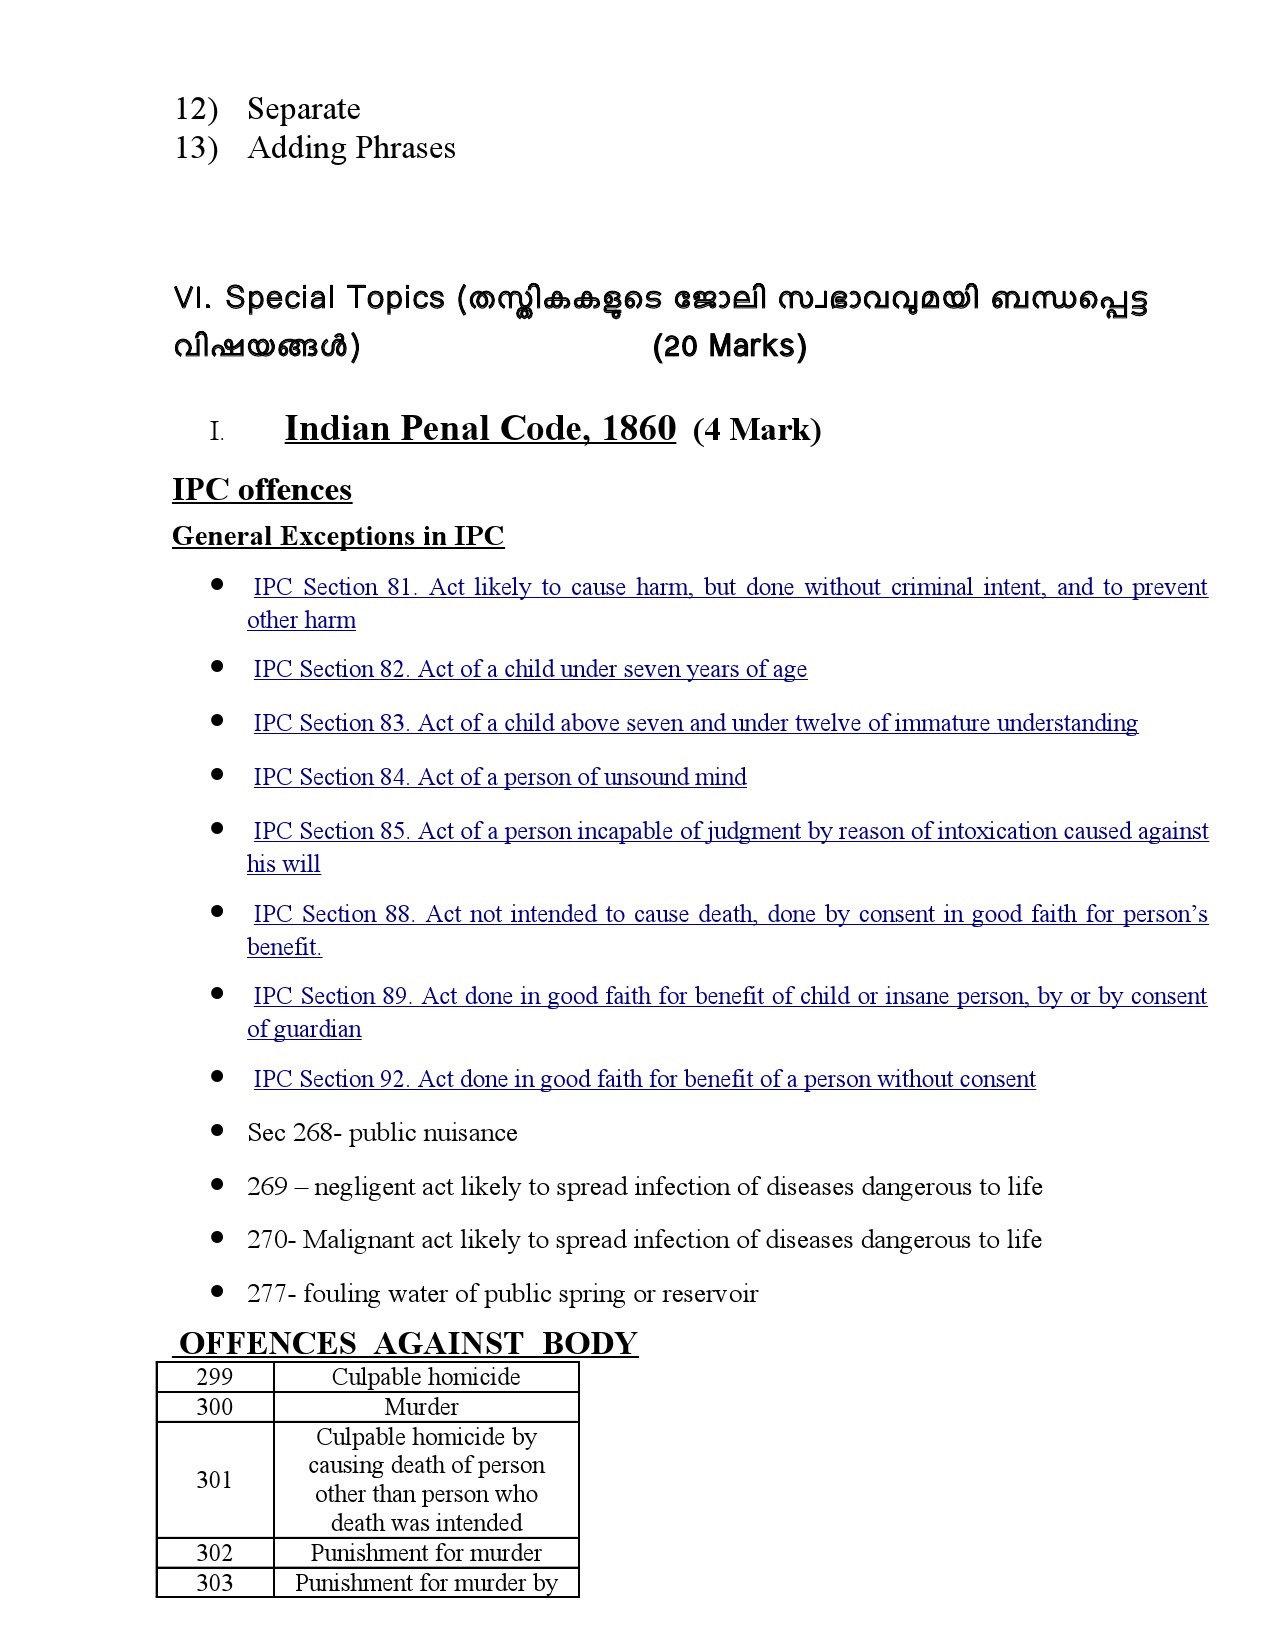 Civil Police Officer Final Examination Syllabus For Plus Two Level - Notification Image 11